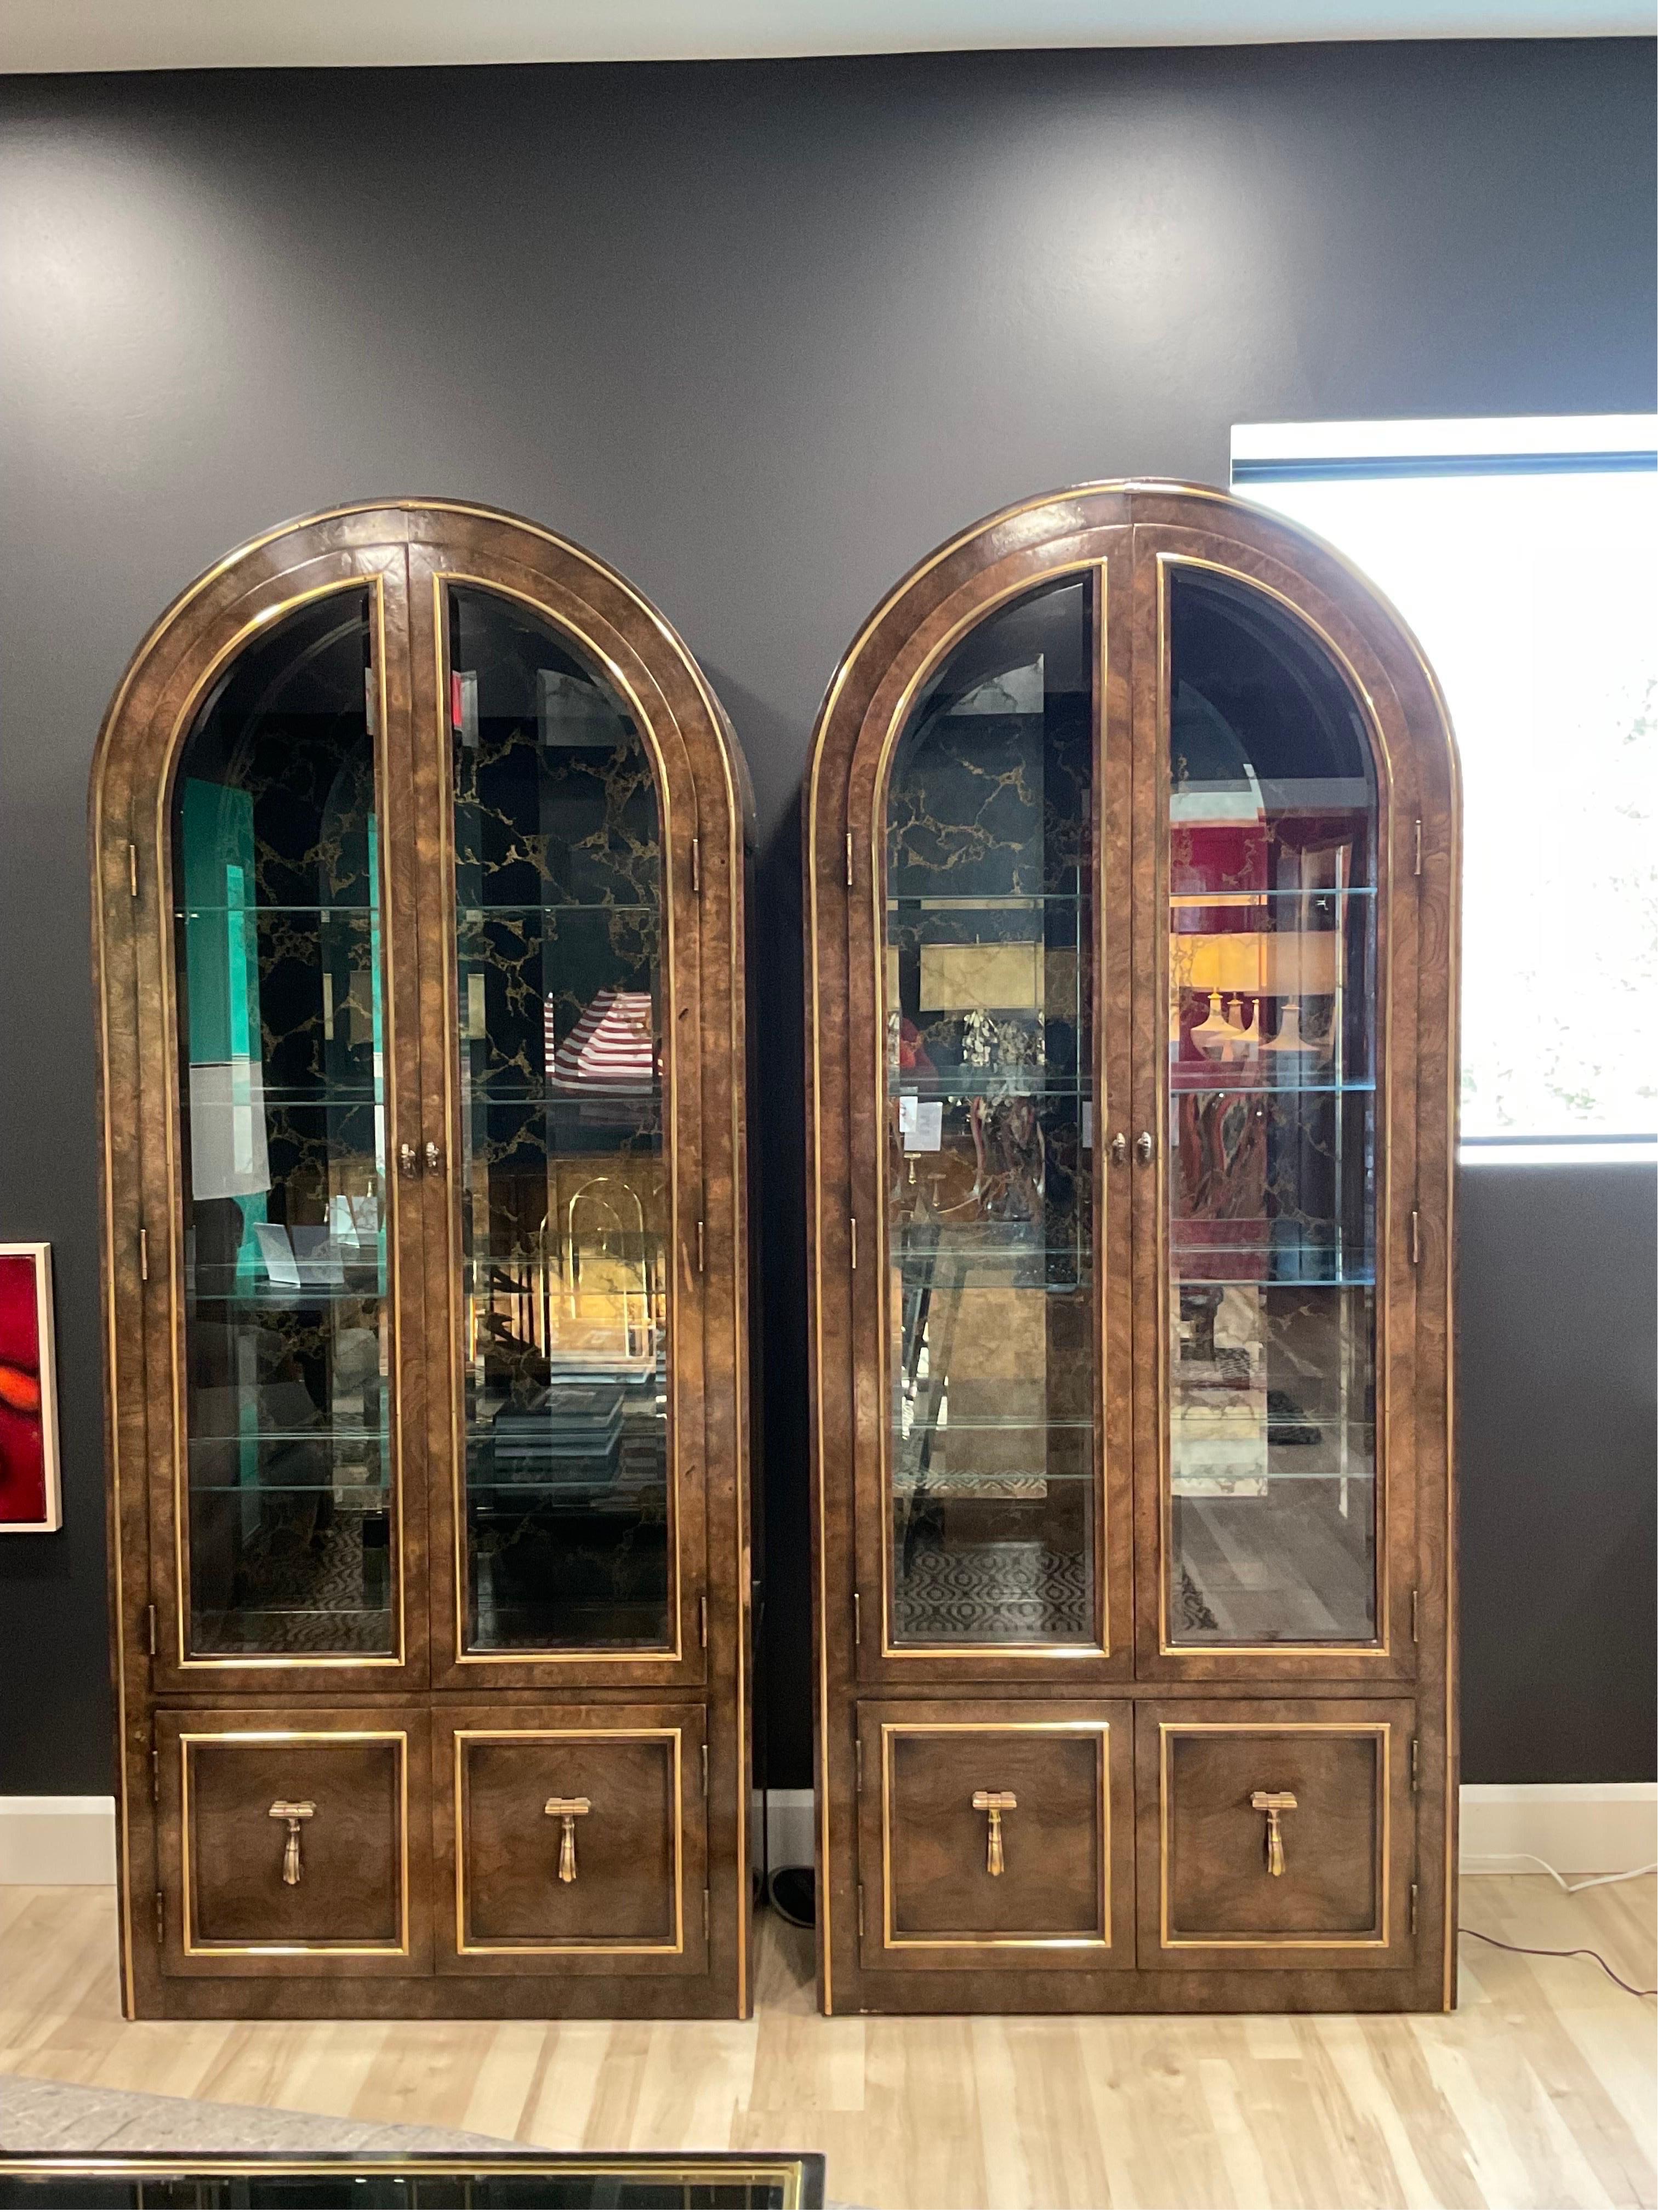 Spectacular pair of Burled Wood, lighted display cases with Eglomise mirrored backs by William Doezema for Mastercraft. Circa 1950’s. Very subtle signs of wear/use Brilliant pieces. The amazing detail that Mastercraft put into these pieces would be